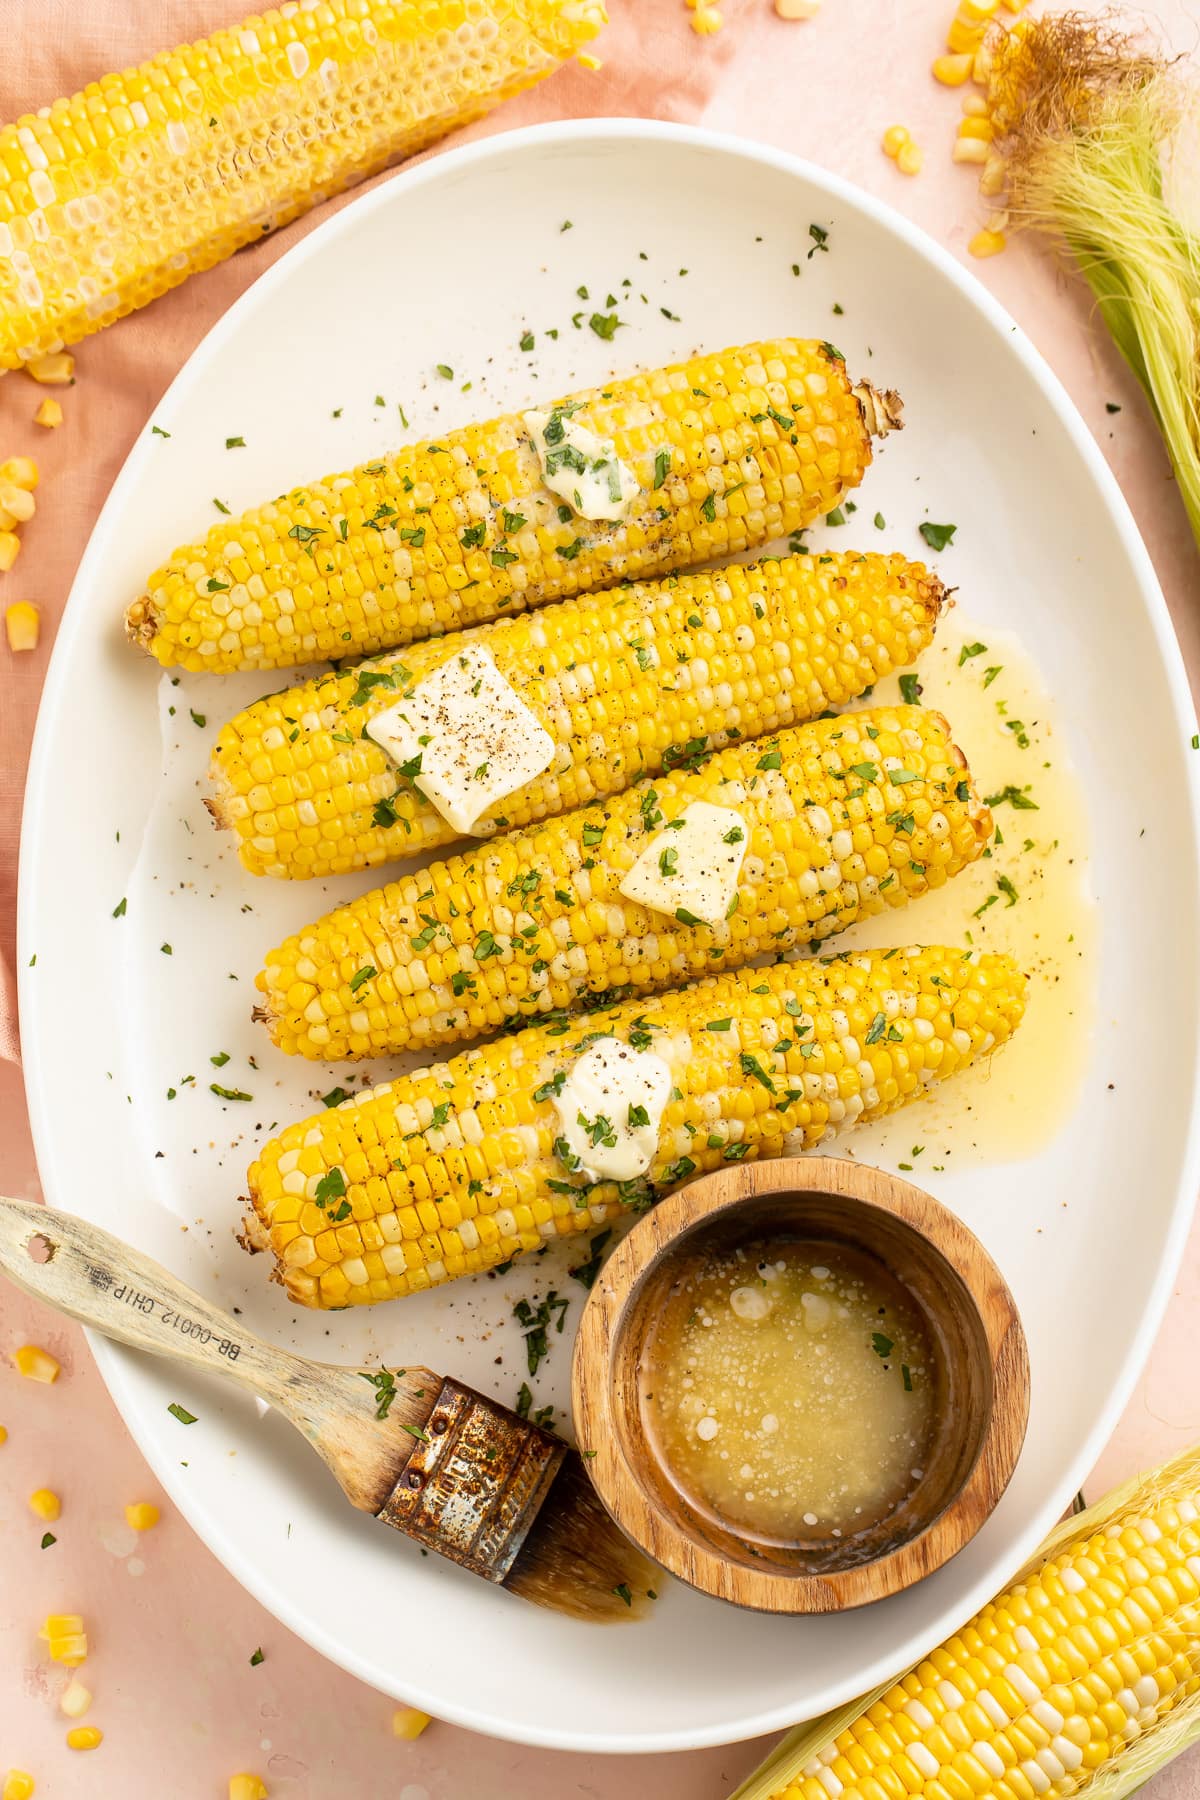 4 ears of air fryer corn on the cob arranged on a white oval platter next to a ramekin of melted butter.